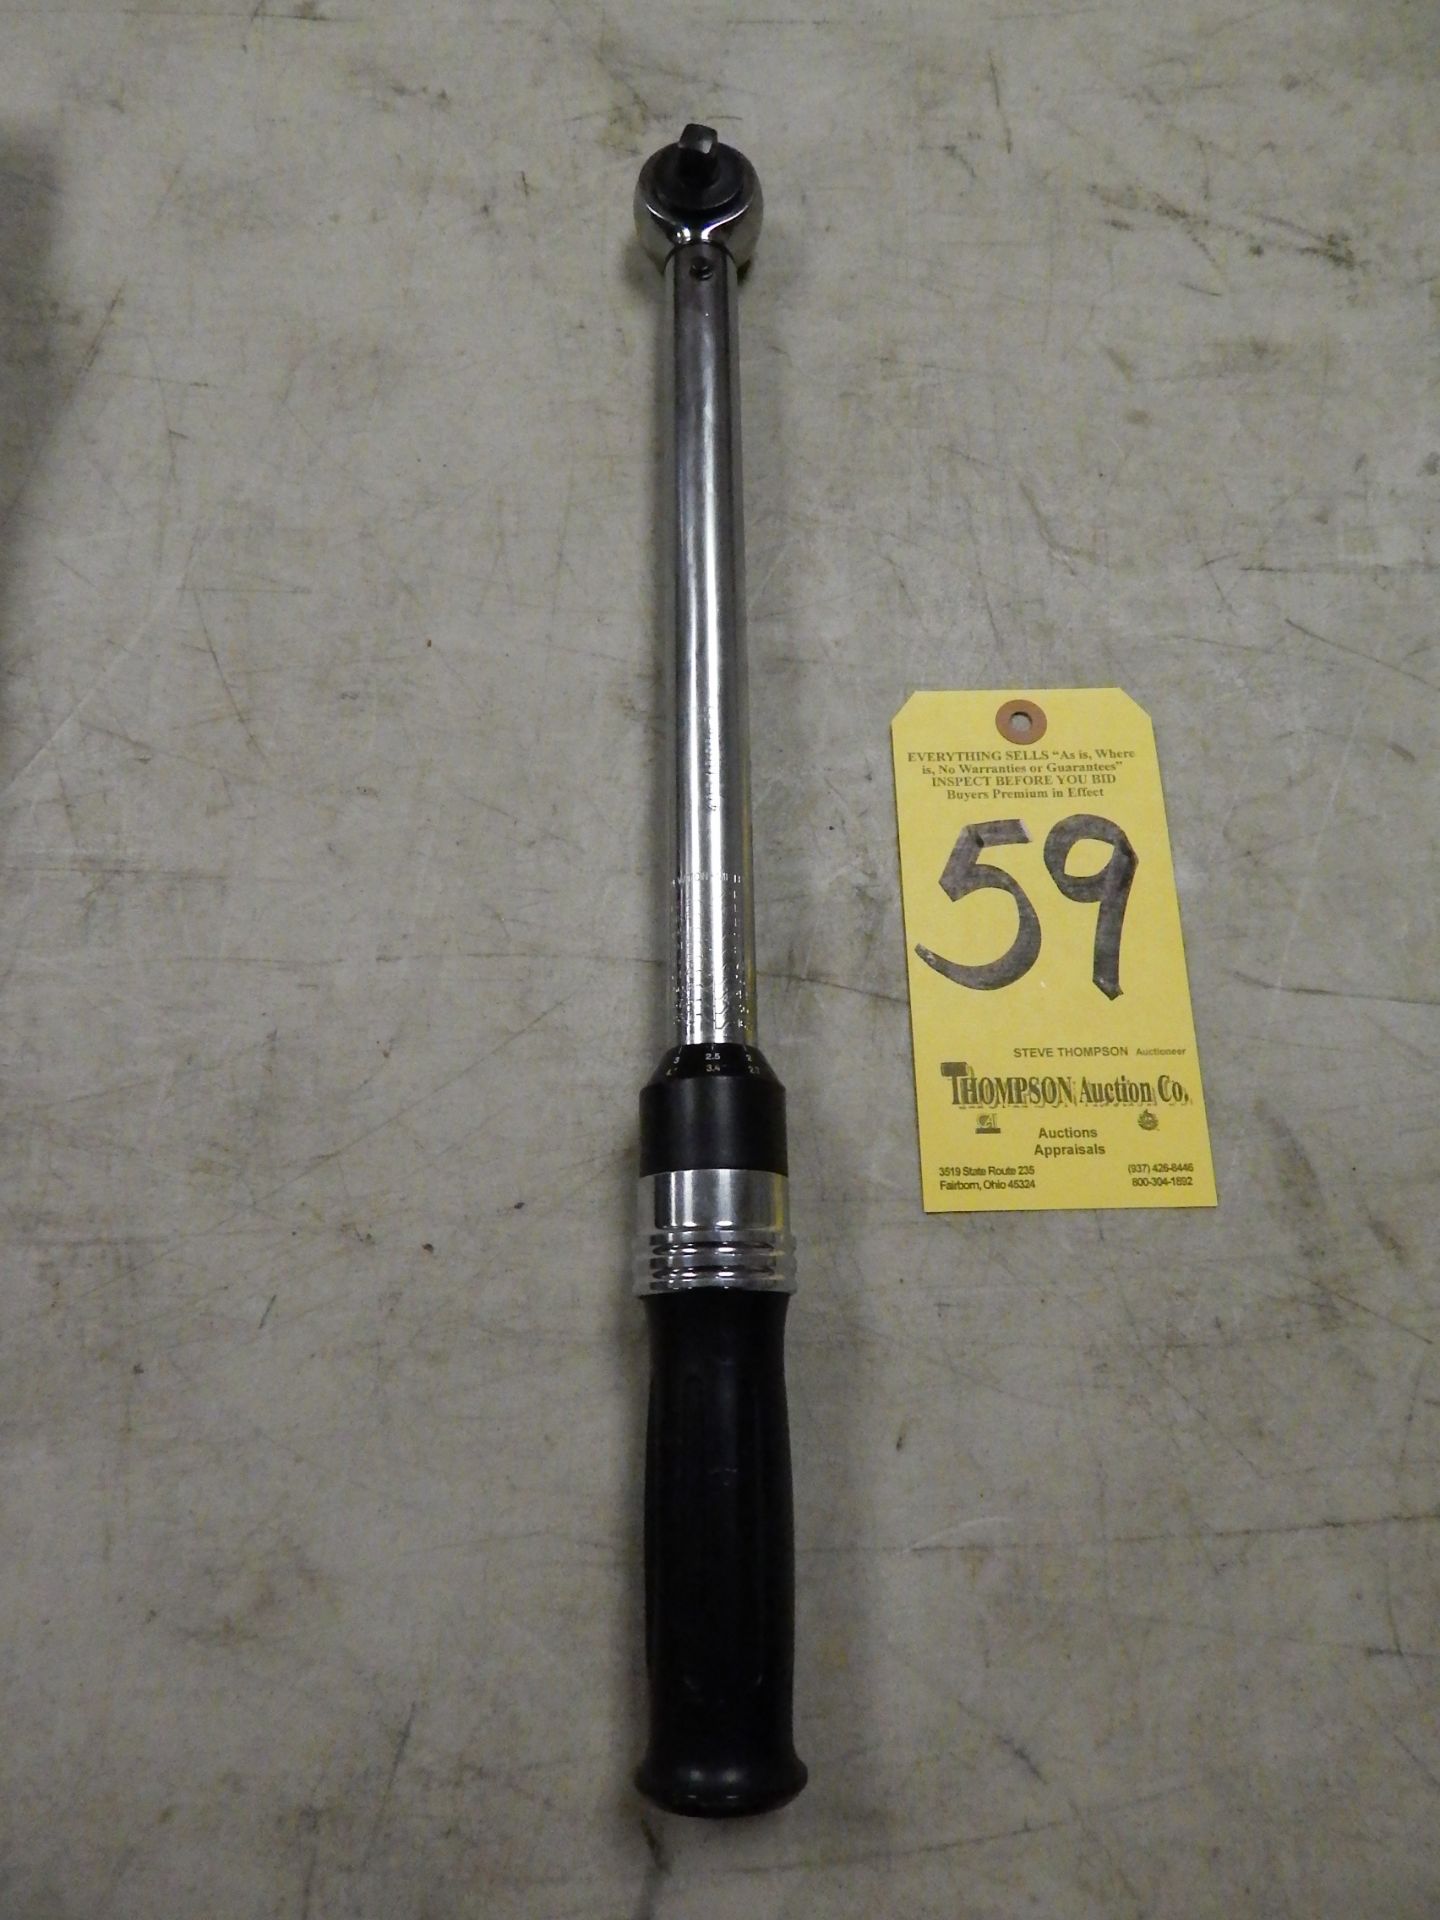 S& K Torque Wrench, 10-100 Foot Pounds